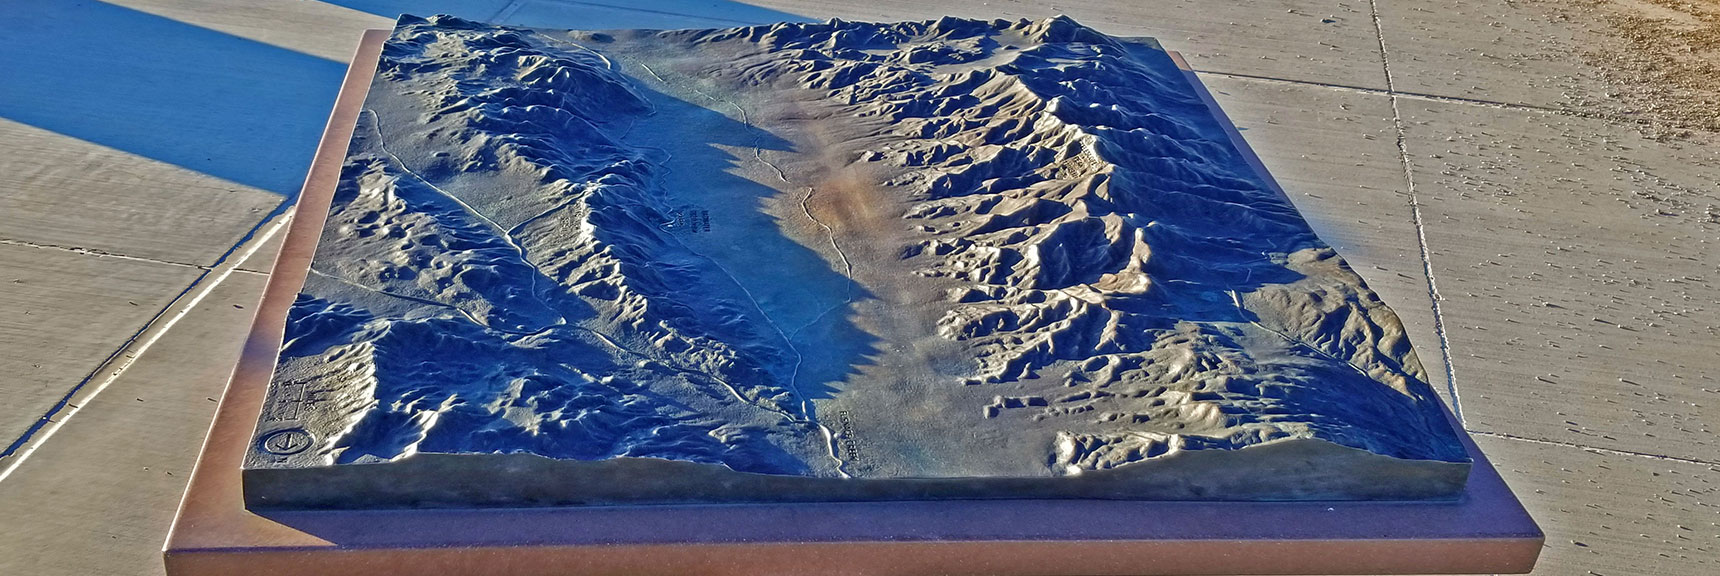 Death Valley Relief Map | Dante's View to Mt. Perry | Death Valley National Park, CA